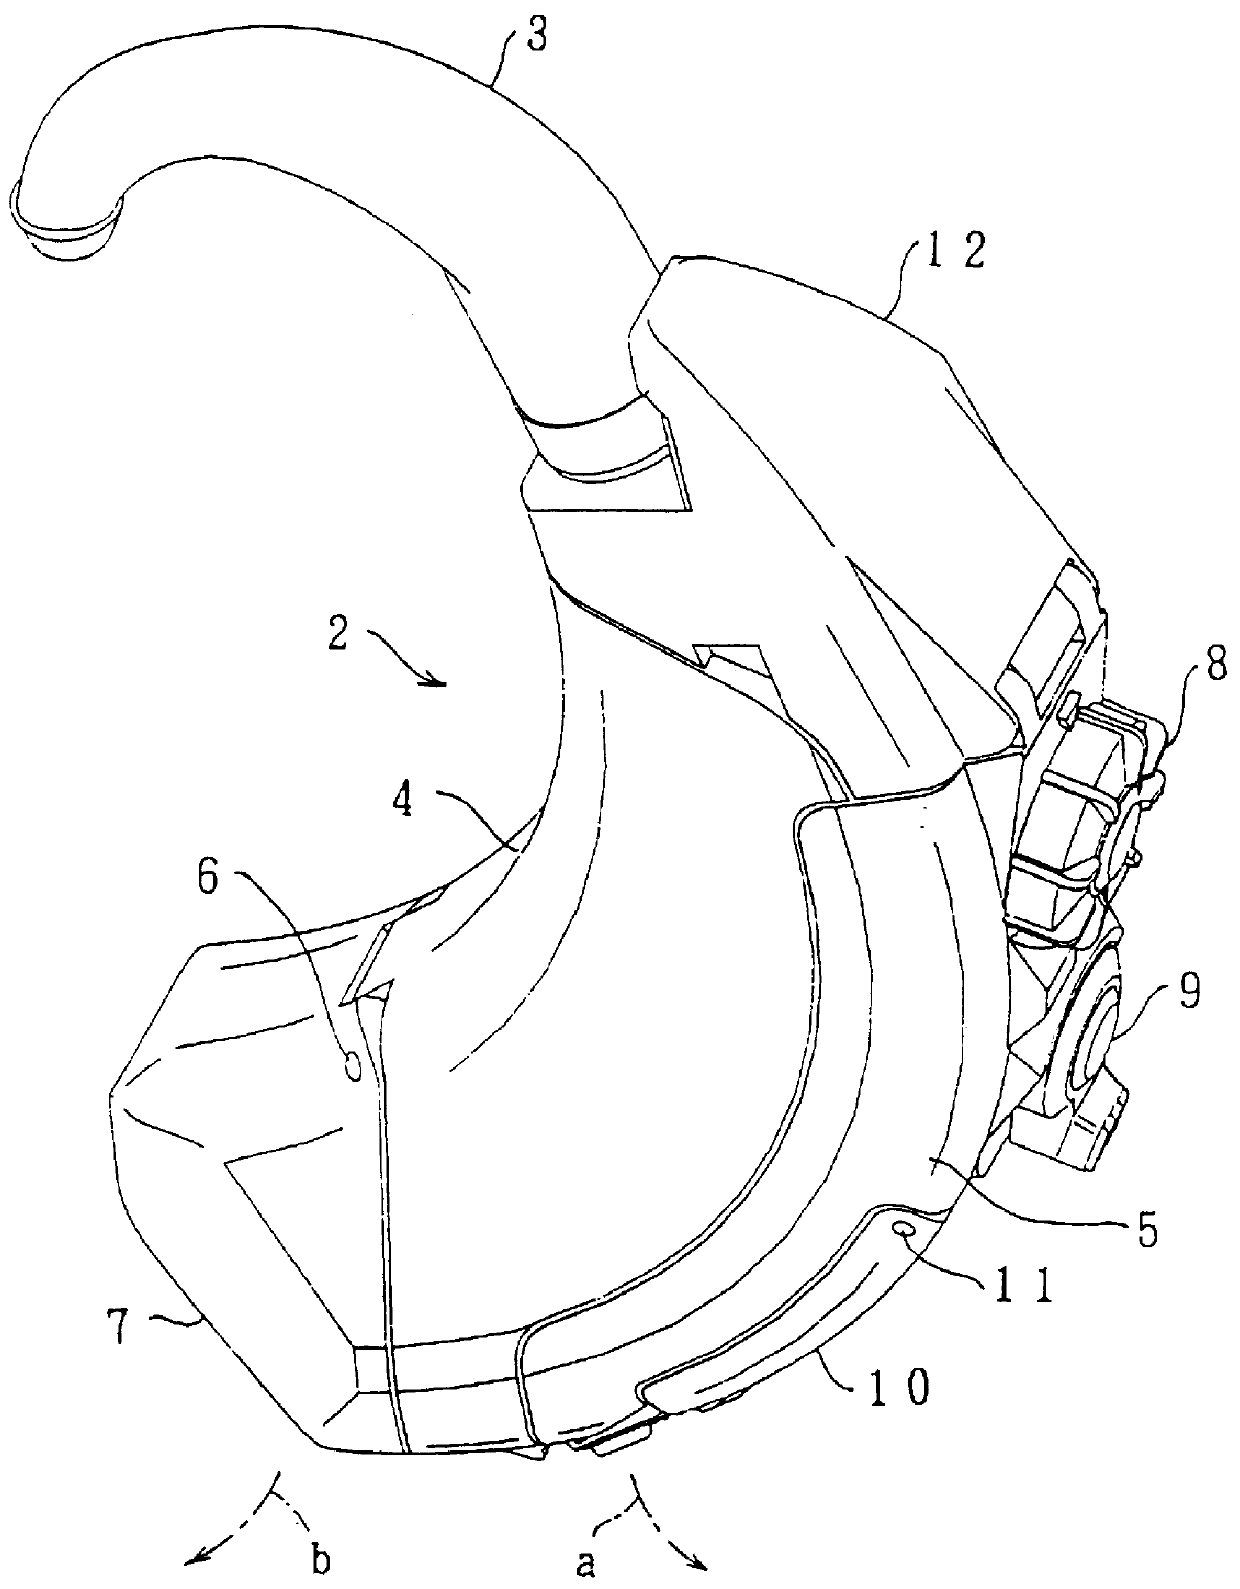 Battery receiving chamber and hearing aid